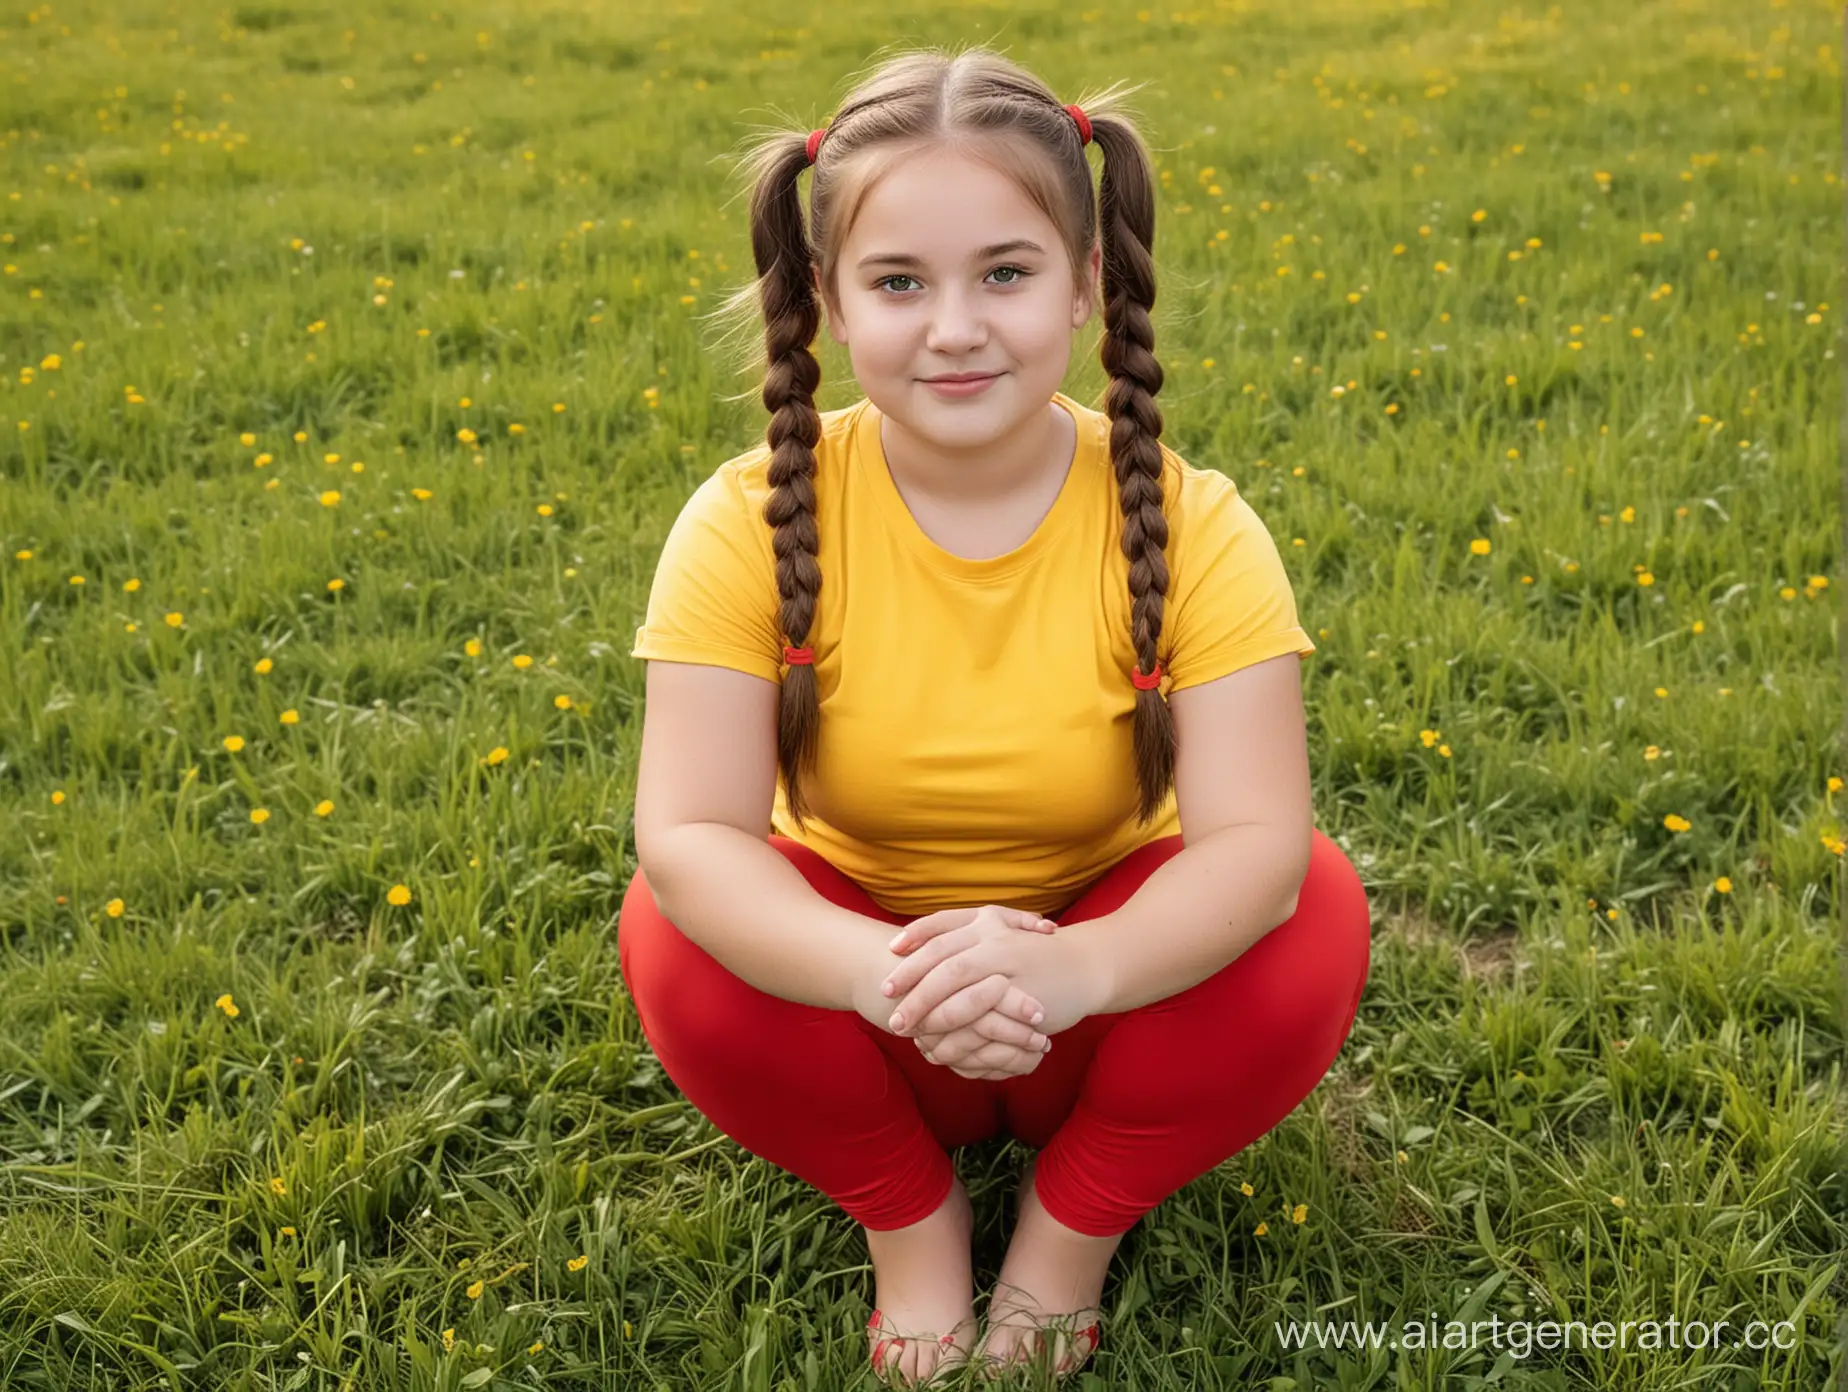 Youthful-Energy-Young-Girl-in-Red-Leggings-and-Yellow-TShirt-Playing-in-Grass